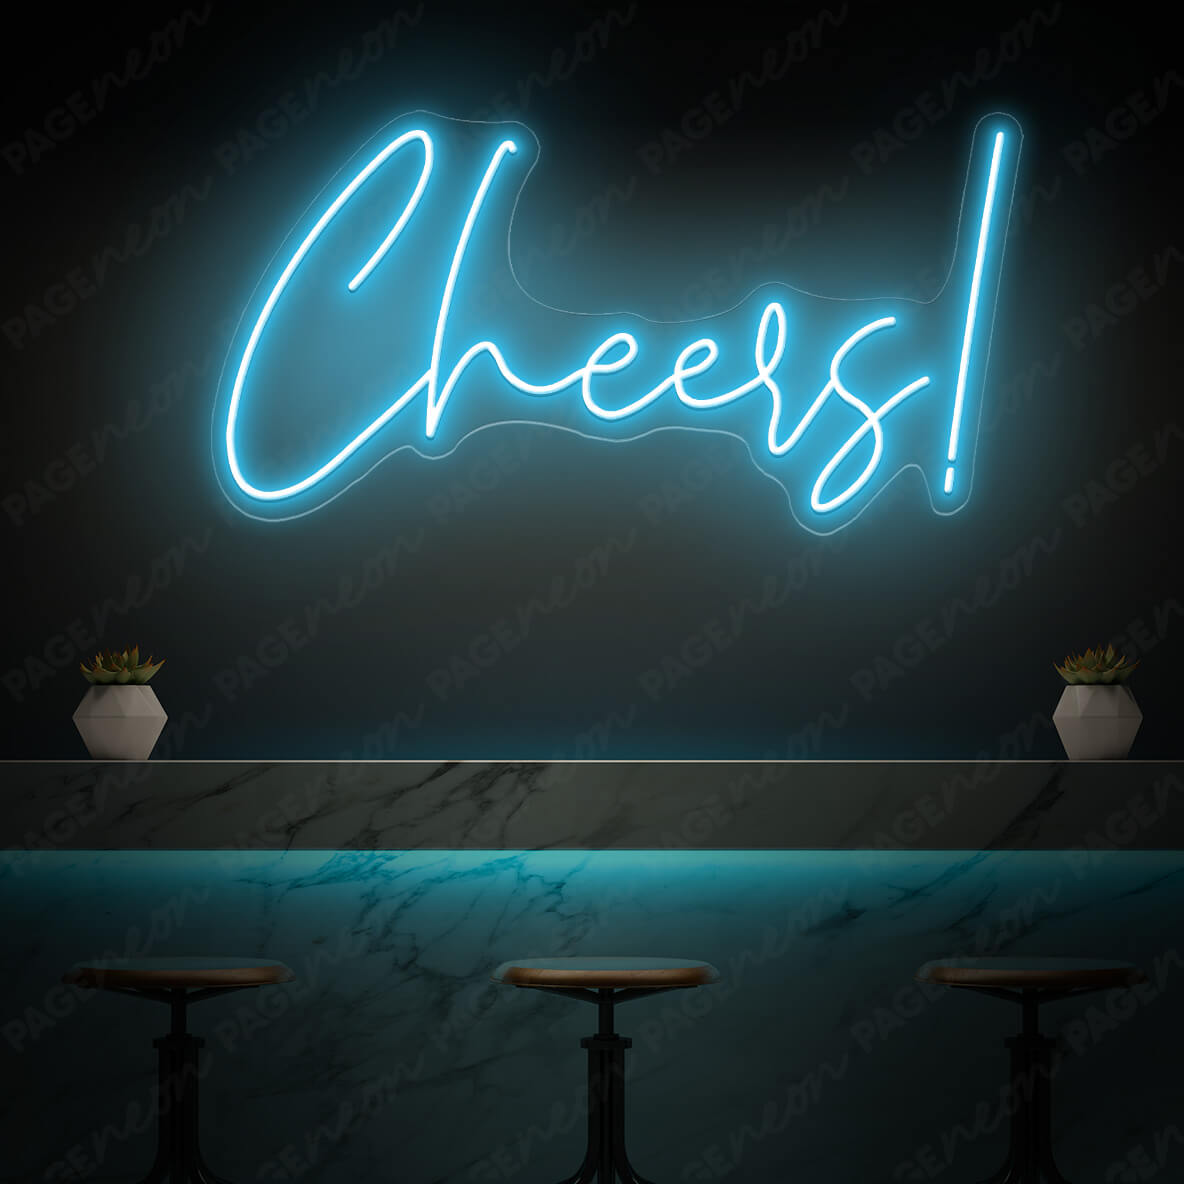 Cheers Neon Sign Bar Led Sign Light Blue